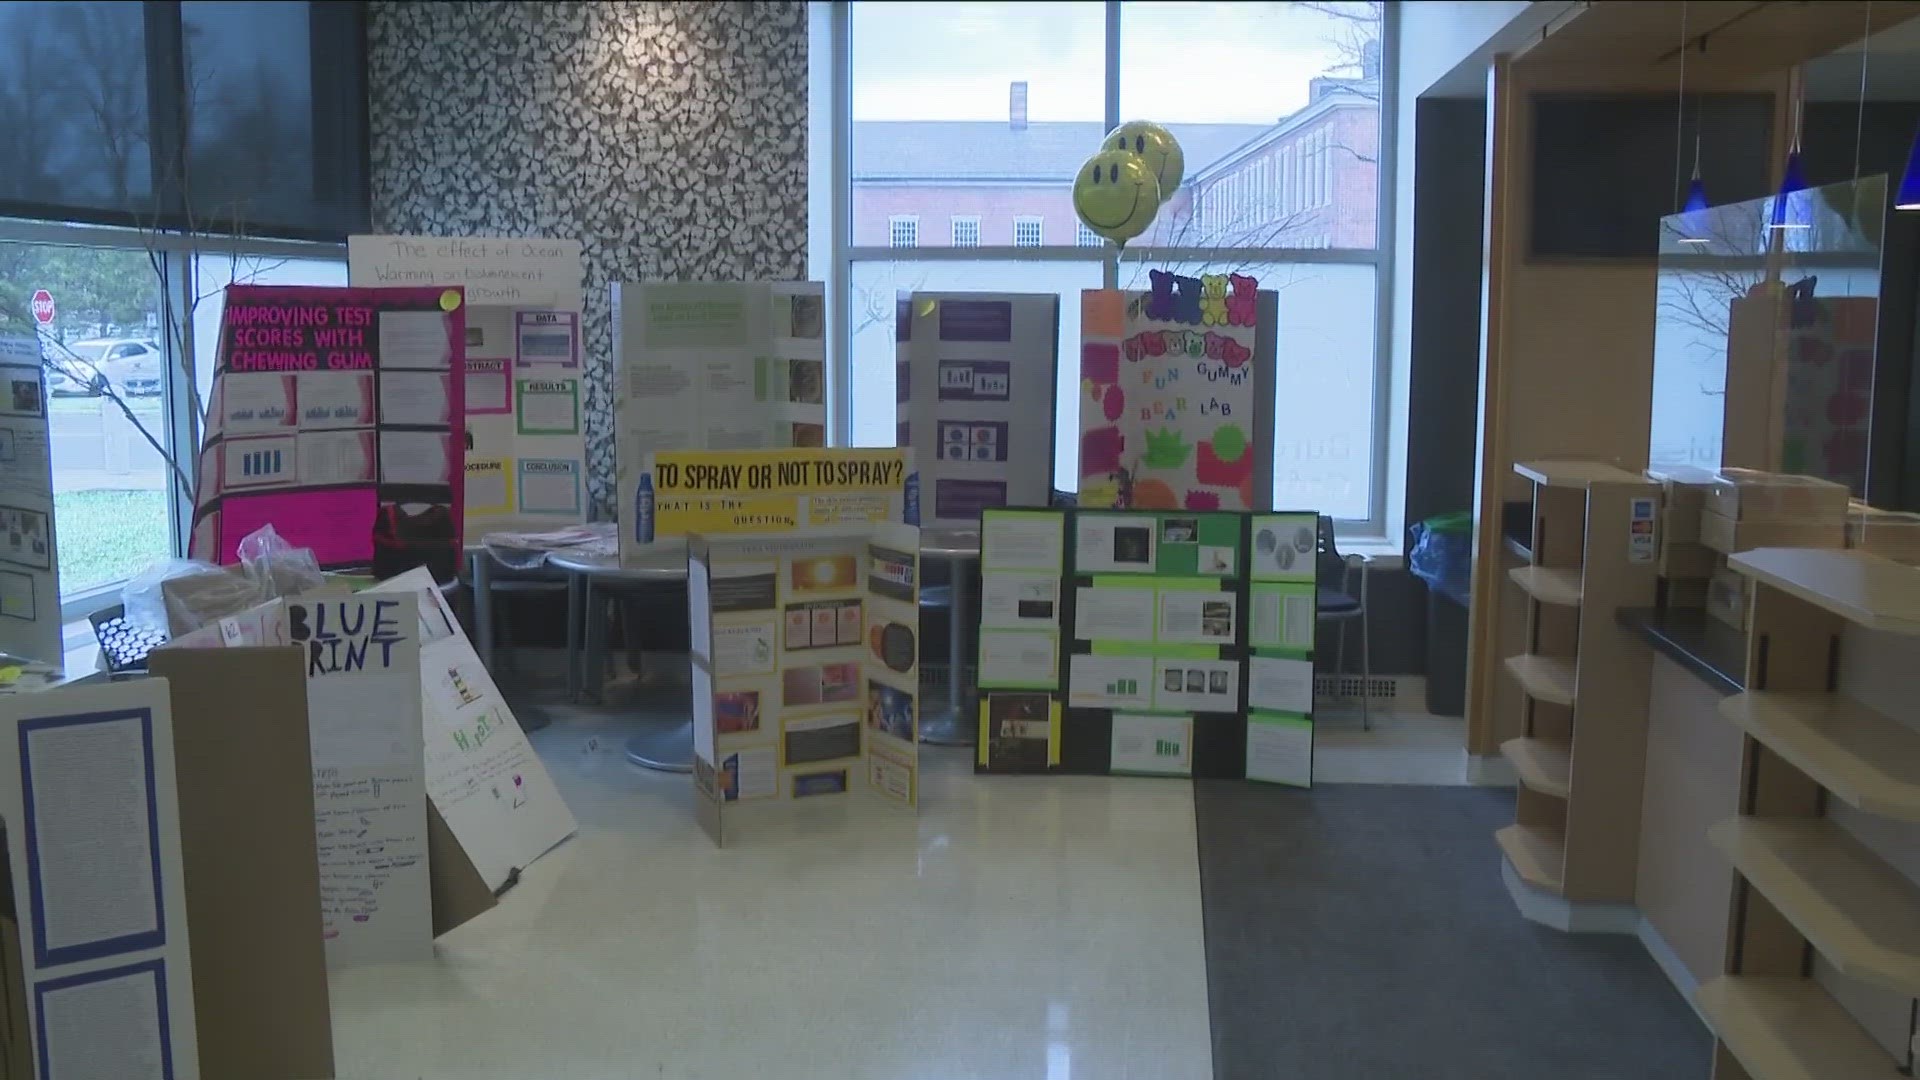 This was their largest science fair with 40 submissions. Judges picked winners based on their invention, experiment, and expression.